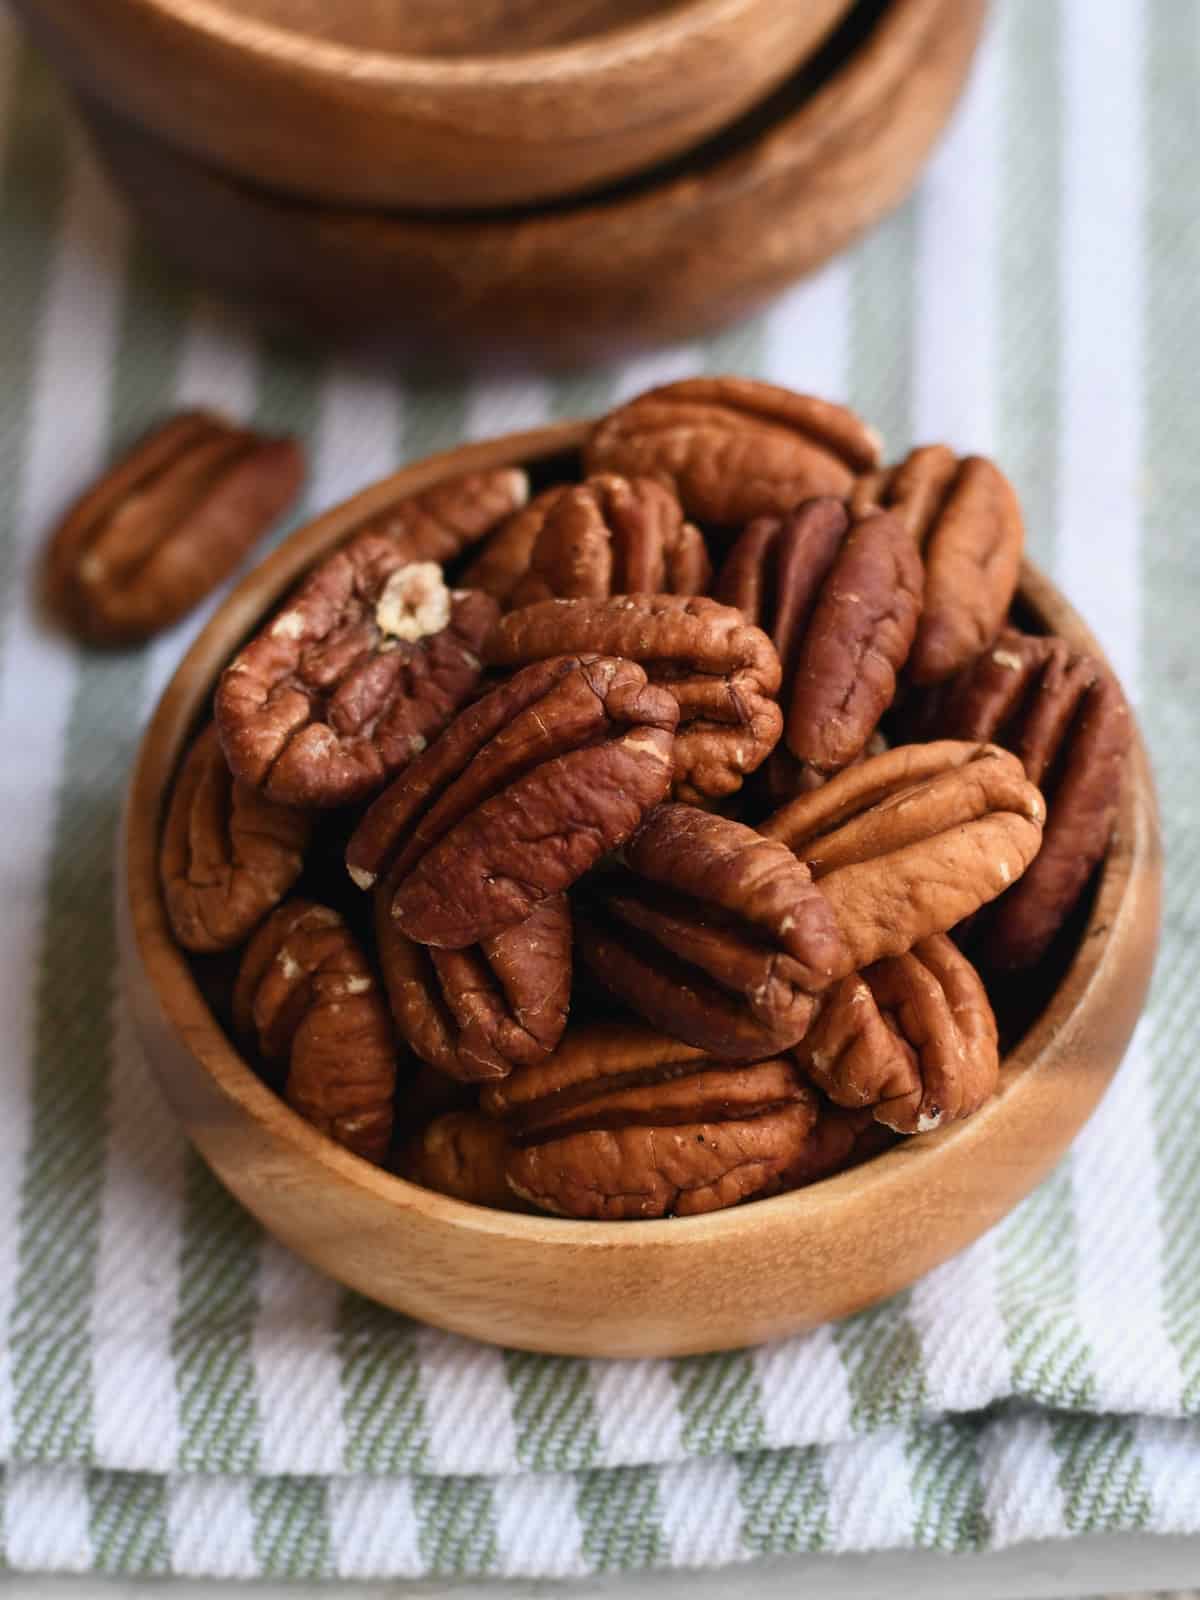 Wooden bowl of pecan halves with stack of wooden bowls above it.